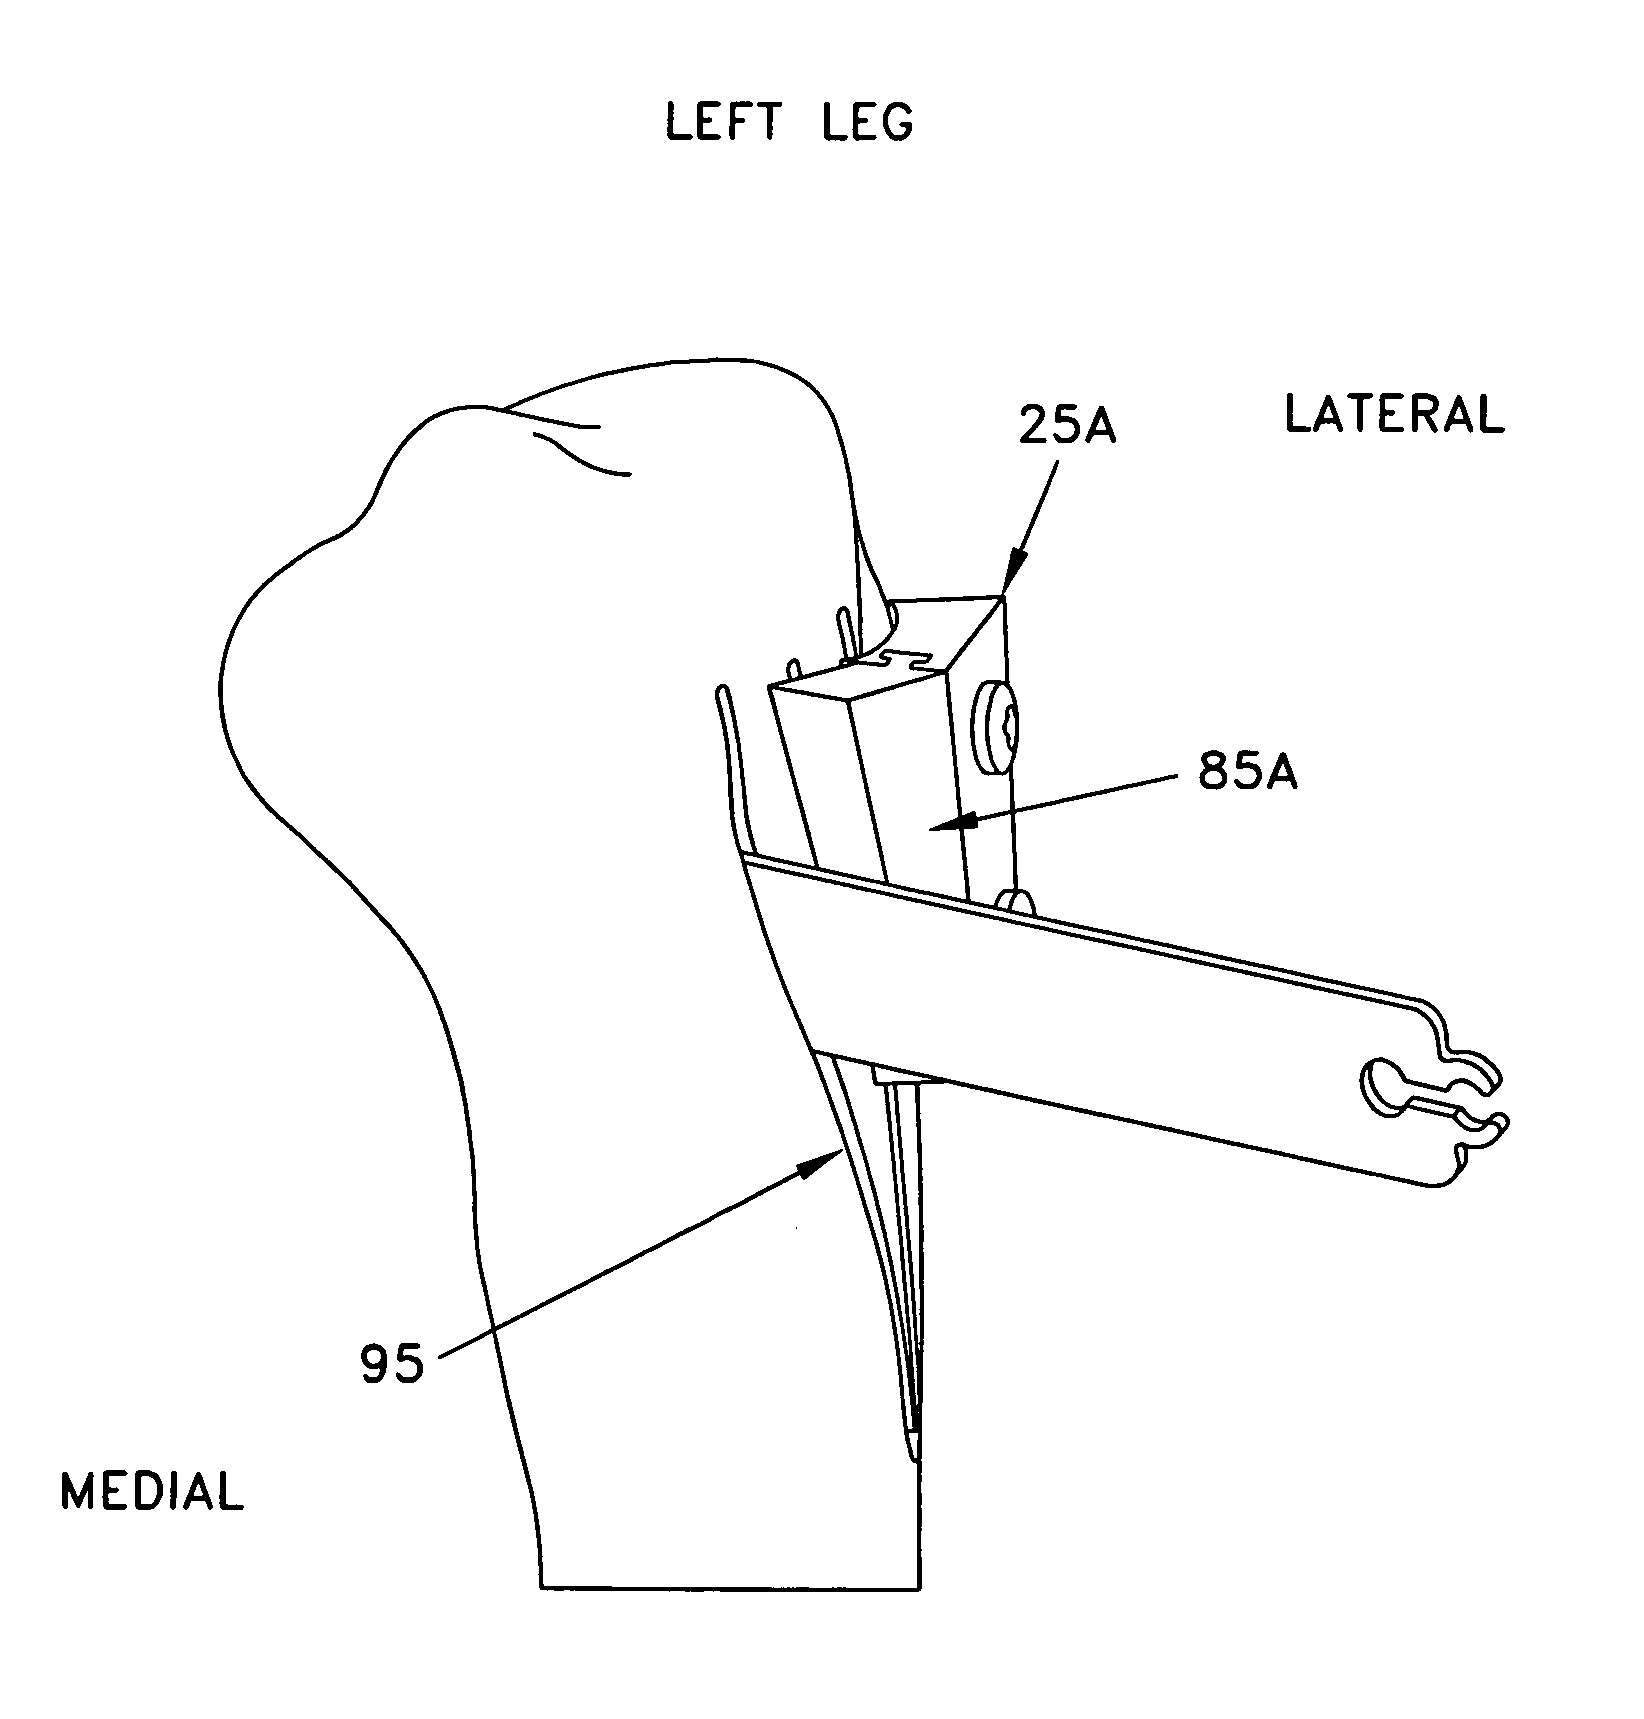 Method and apparatus for performing multidirectional tibial tubercle transfers